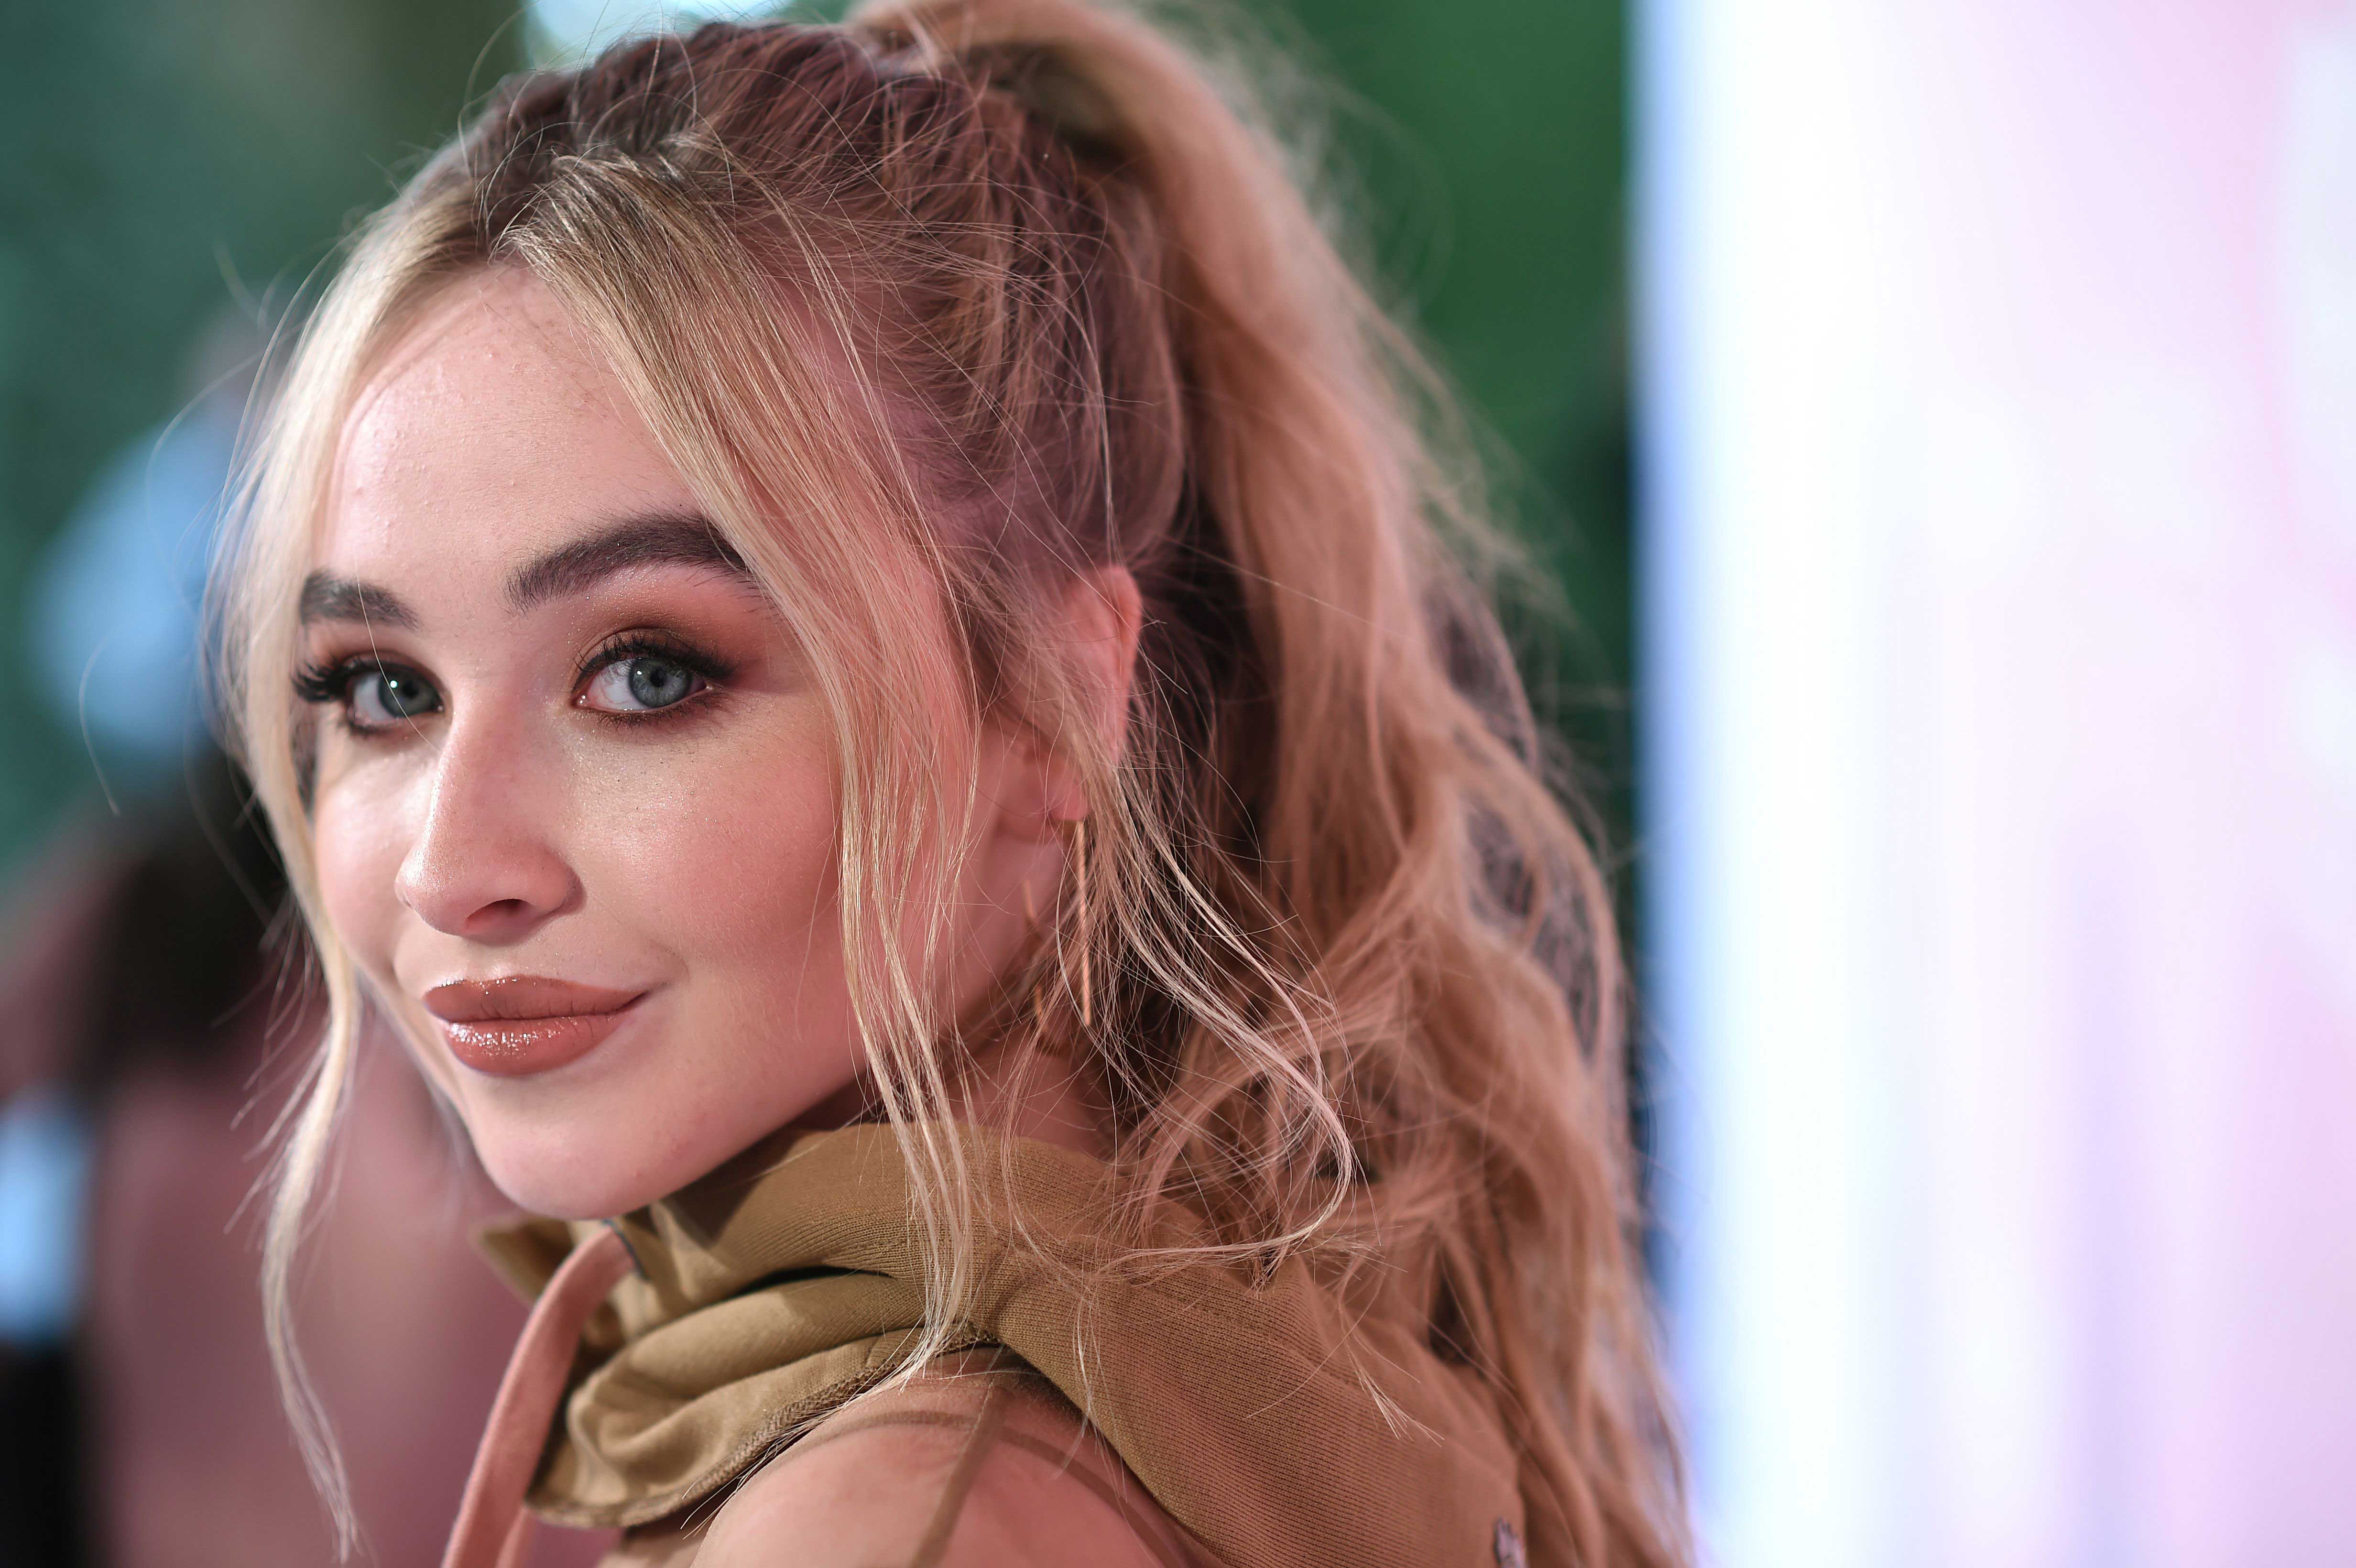 Sabrina Carpenter In 2017, HD Music, 4k Wallpapers, Images, Backgrounds